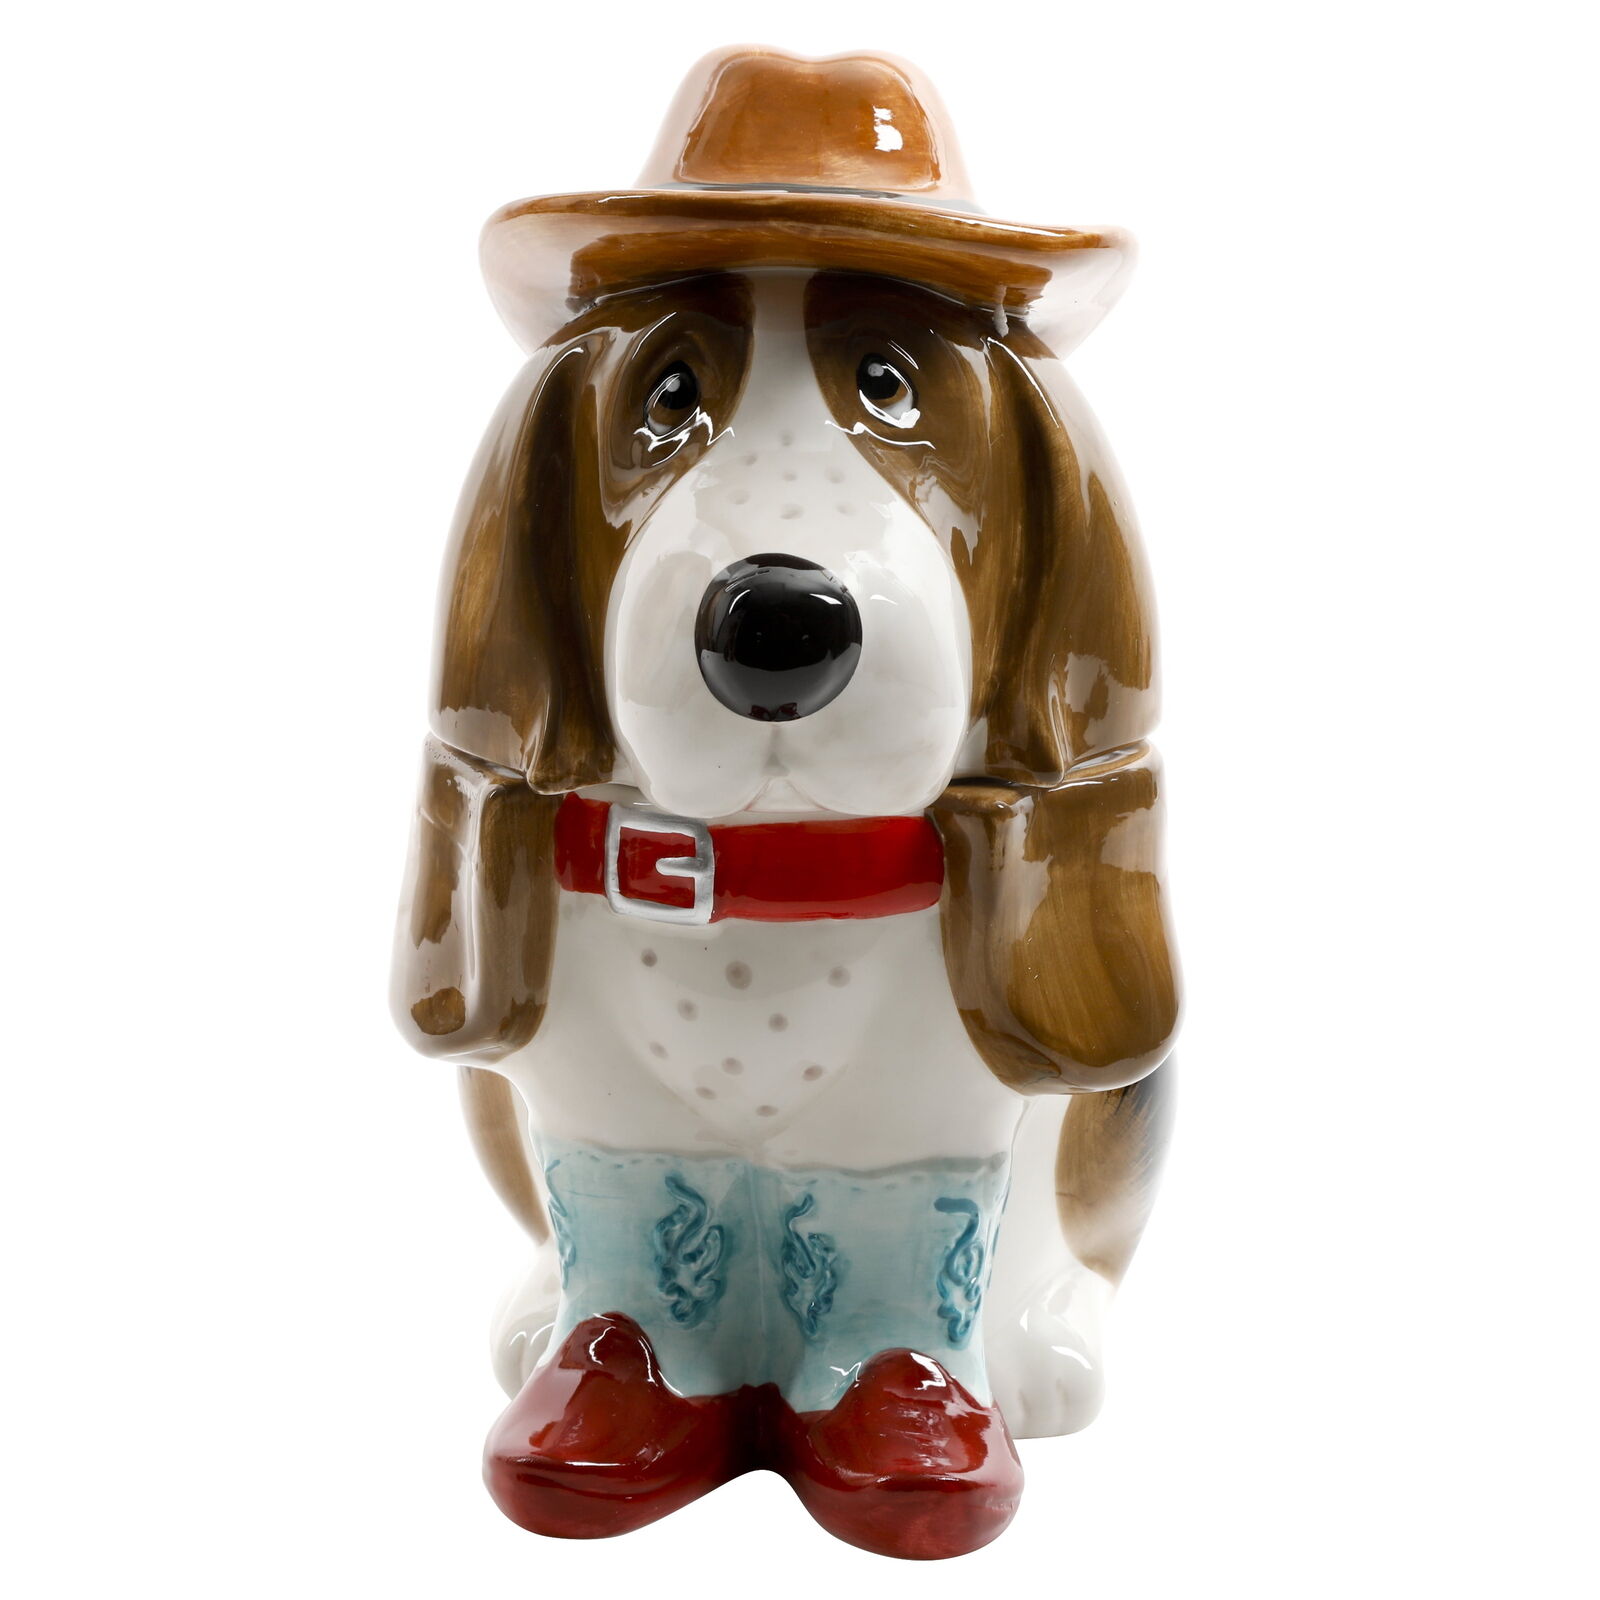 Cowboy Charlie Stoneware Cookie Jar, 6.69 x 8.46 x 12.48 inches, Turquoise